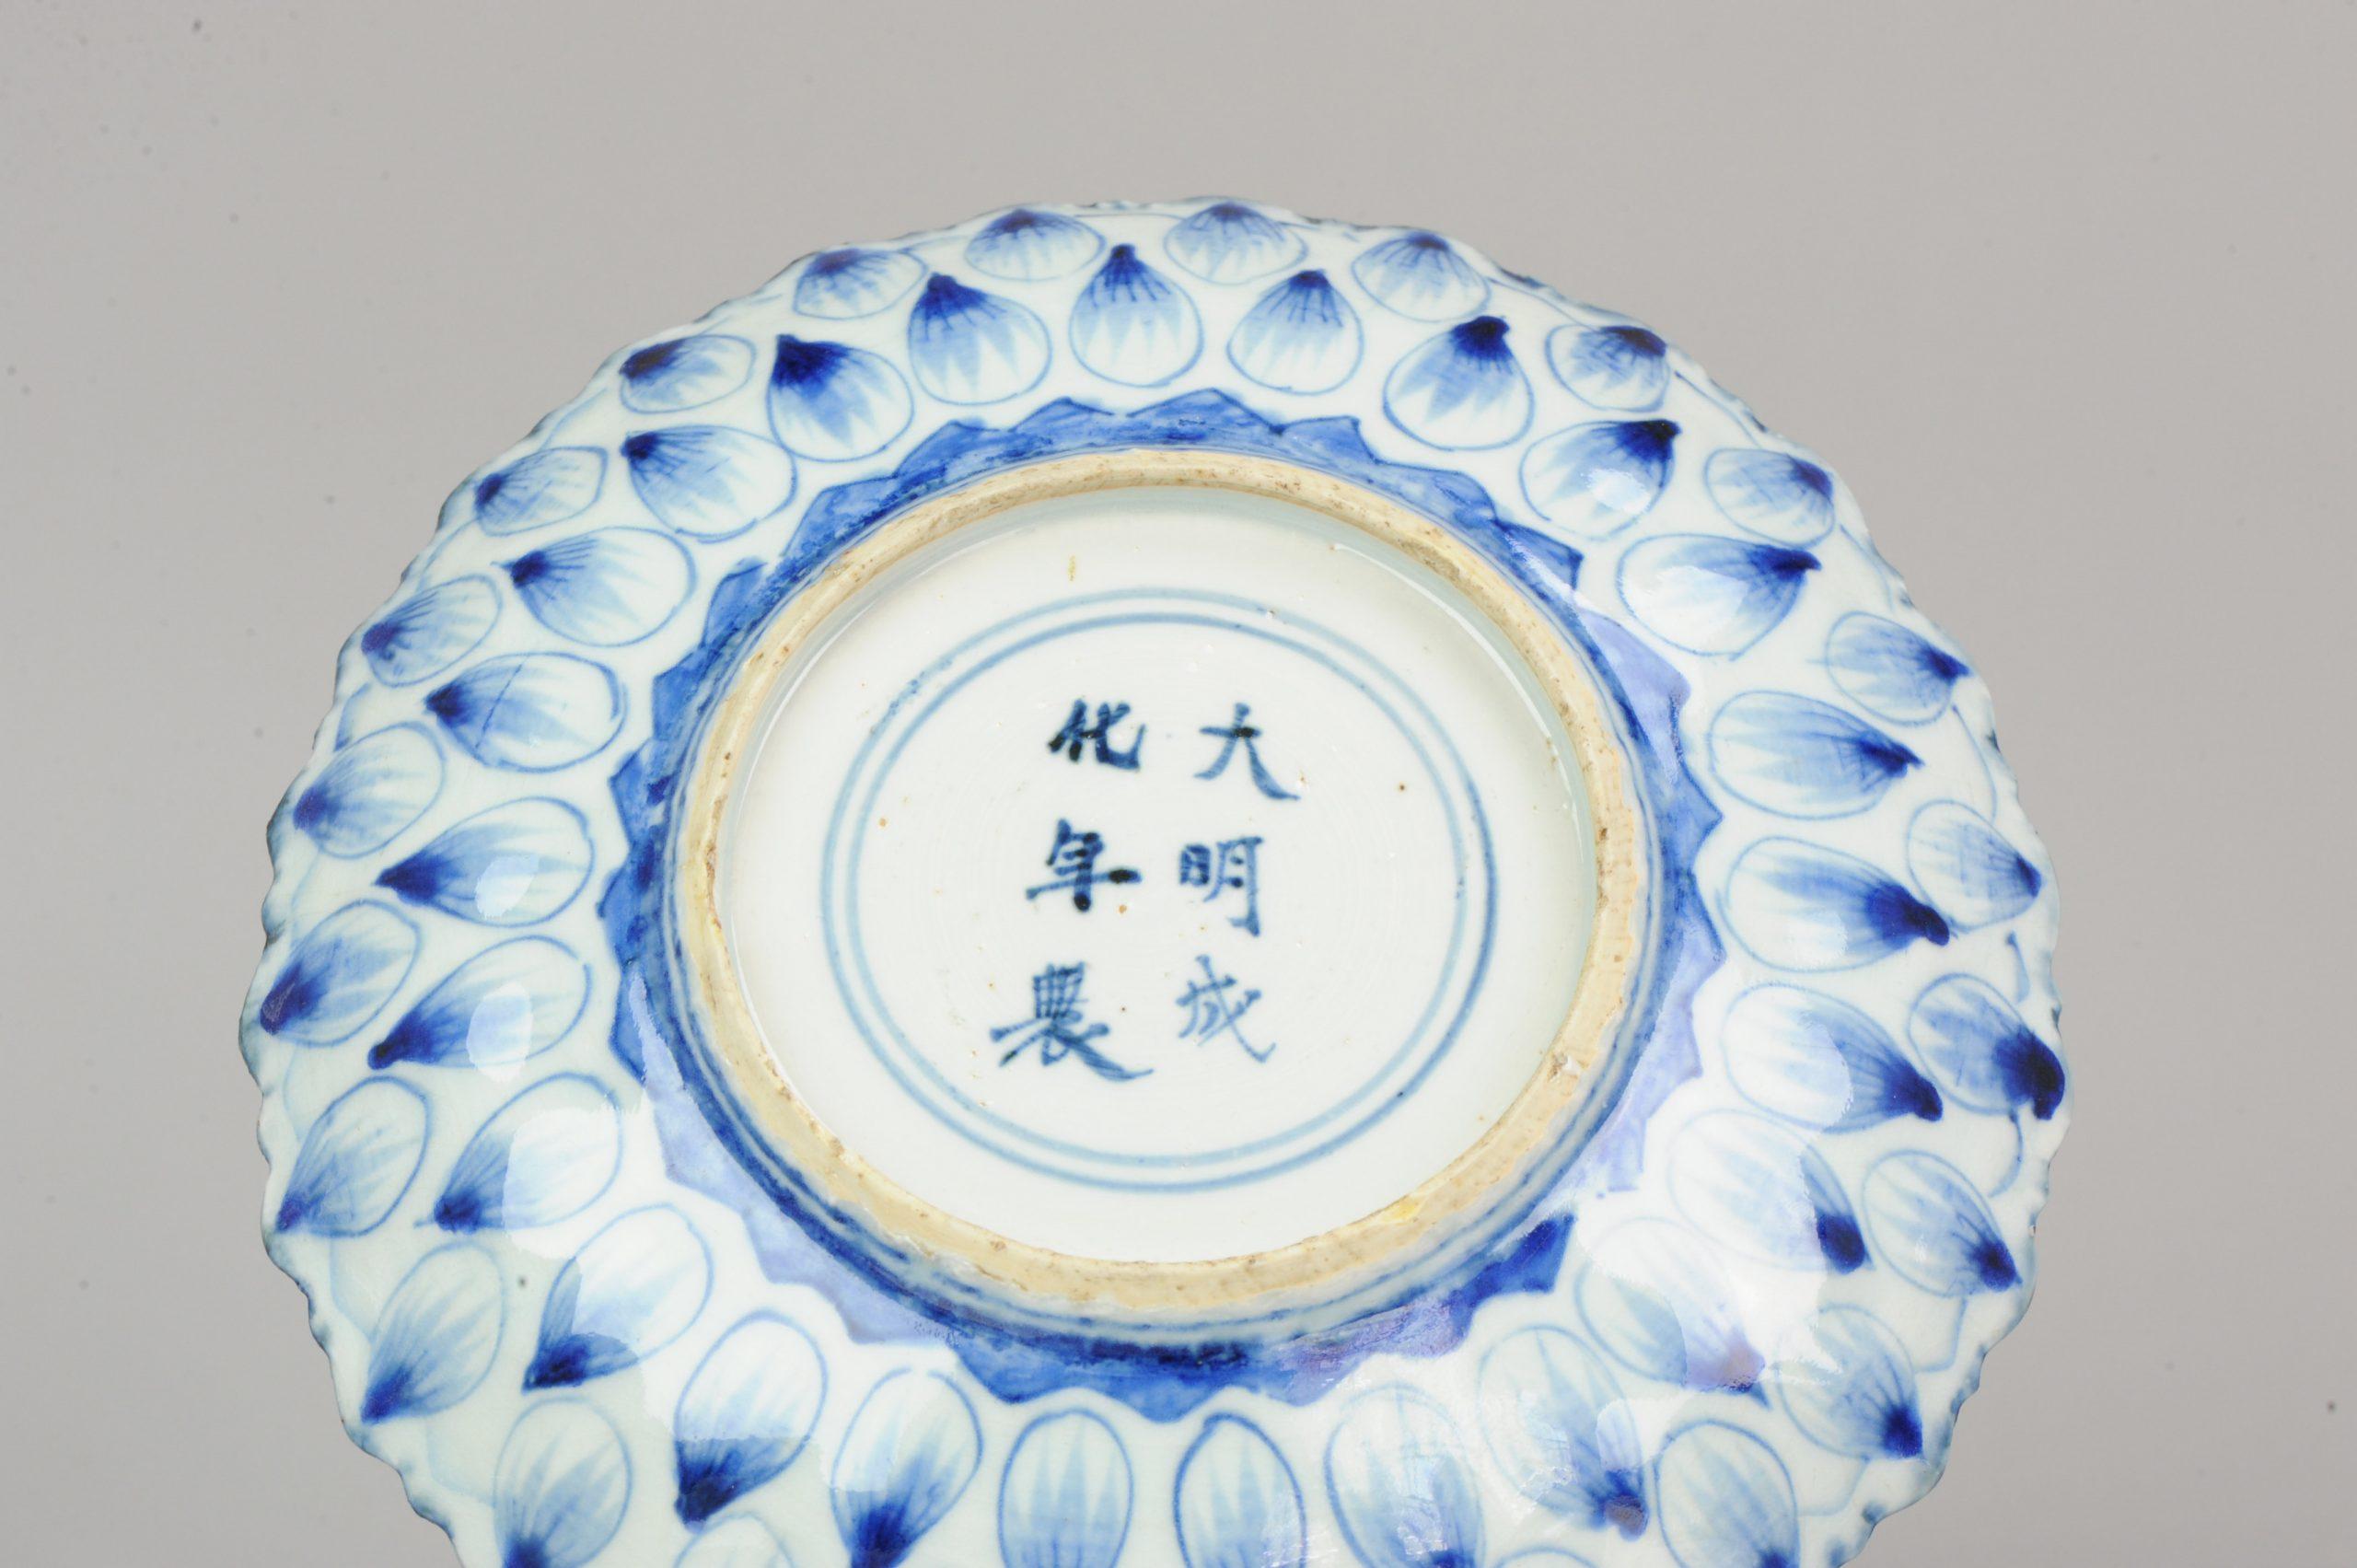 18th Century and Earlier Kosometsuke Antique Chinese 17th Century Ming Dynasty Plate China Porcelain